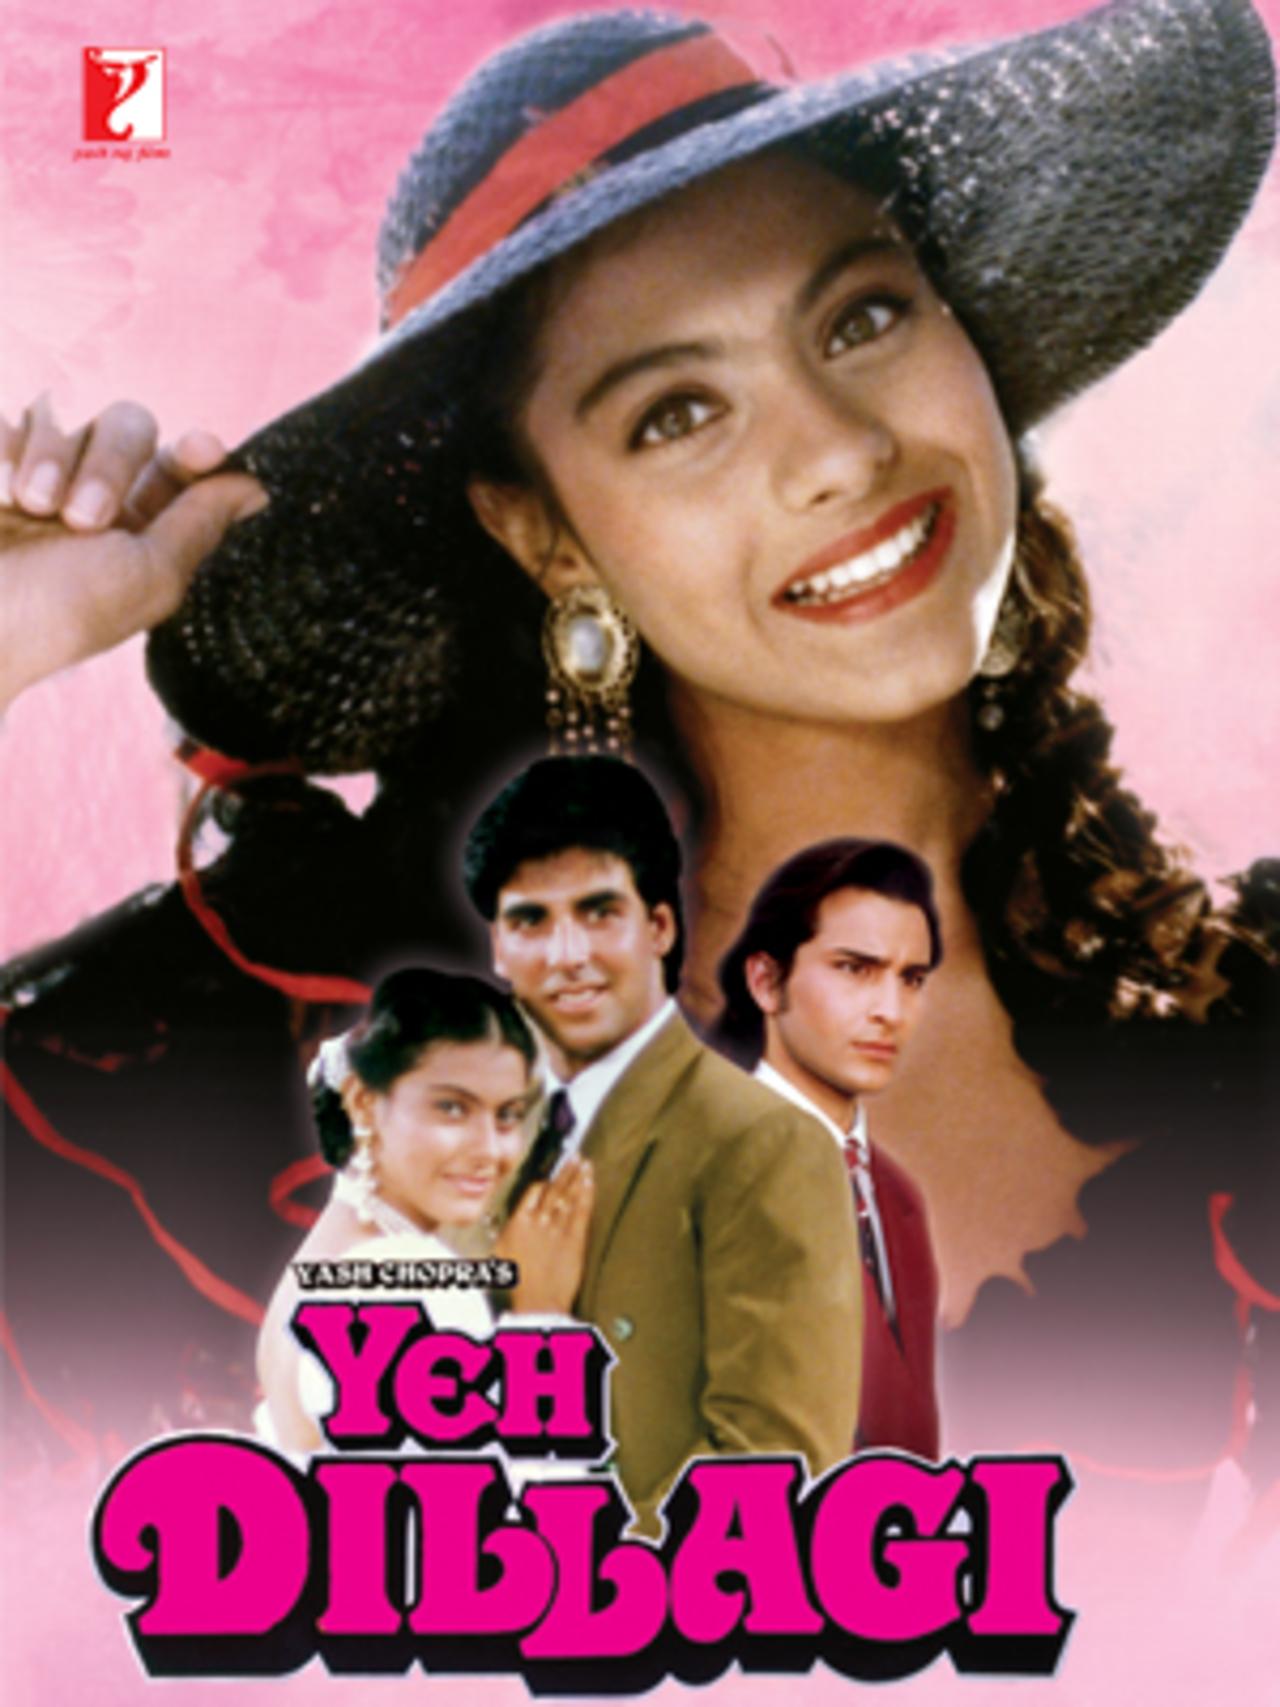 Yeh Dillagi is a romantic drama starring Akshay Kumar and Saif Ali Khan. The film revolves around Vicky who falls in love with the driver’s daughter. His elder brother takes up the responsibility of handling the situation but ends up falling in love with the same girl